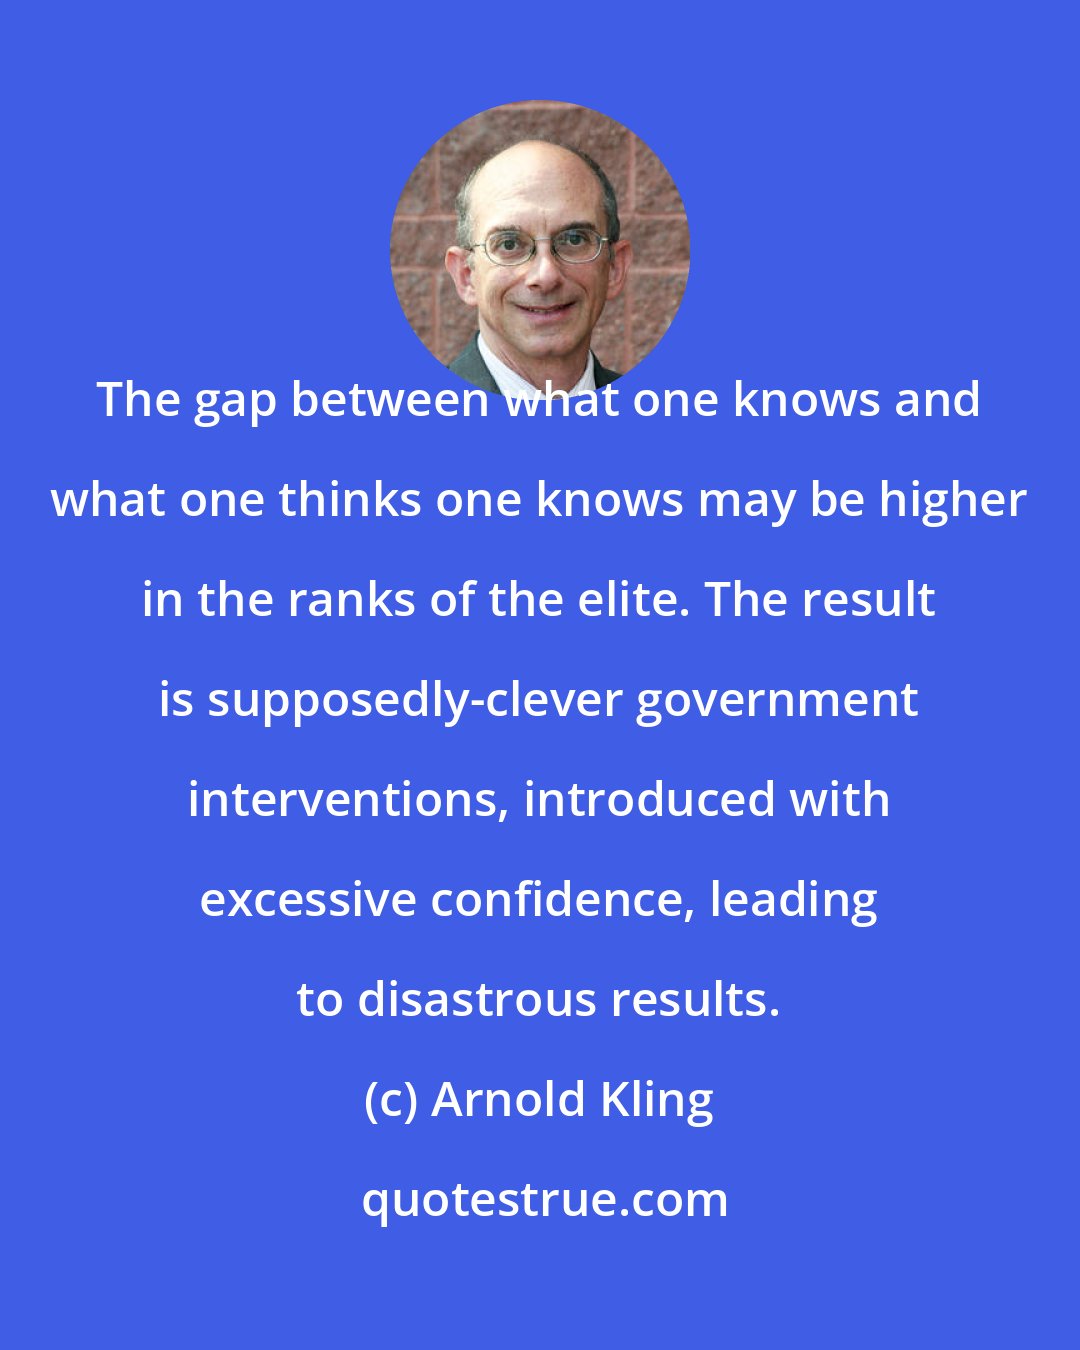 Arnold Kling: The gap between what one knows and what one thinks one knows may be higher in the ranks of the elite. The result is supposedly-clever government interventions, introduced with excessive confidence, leading to disastrous results.